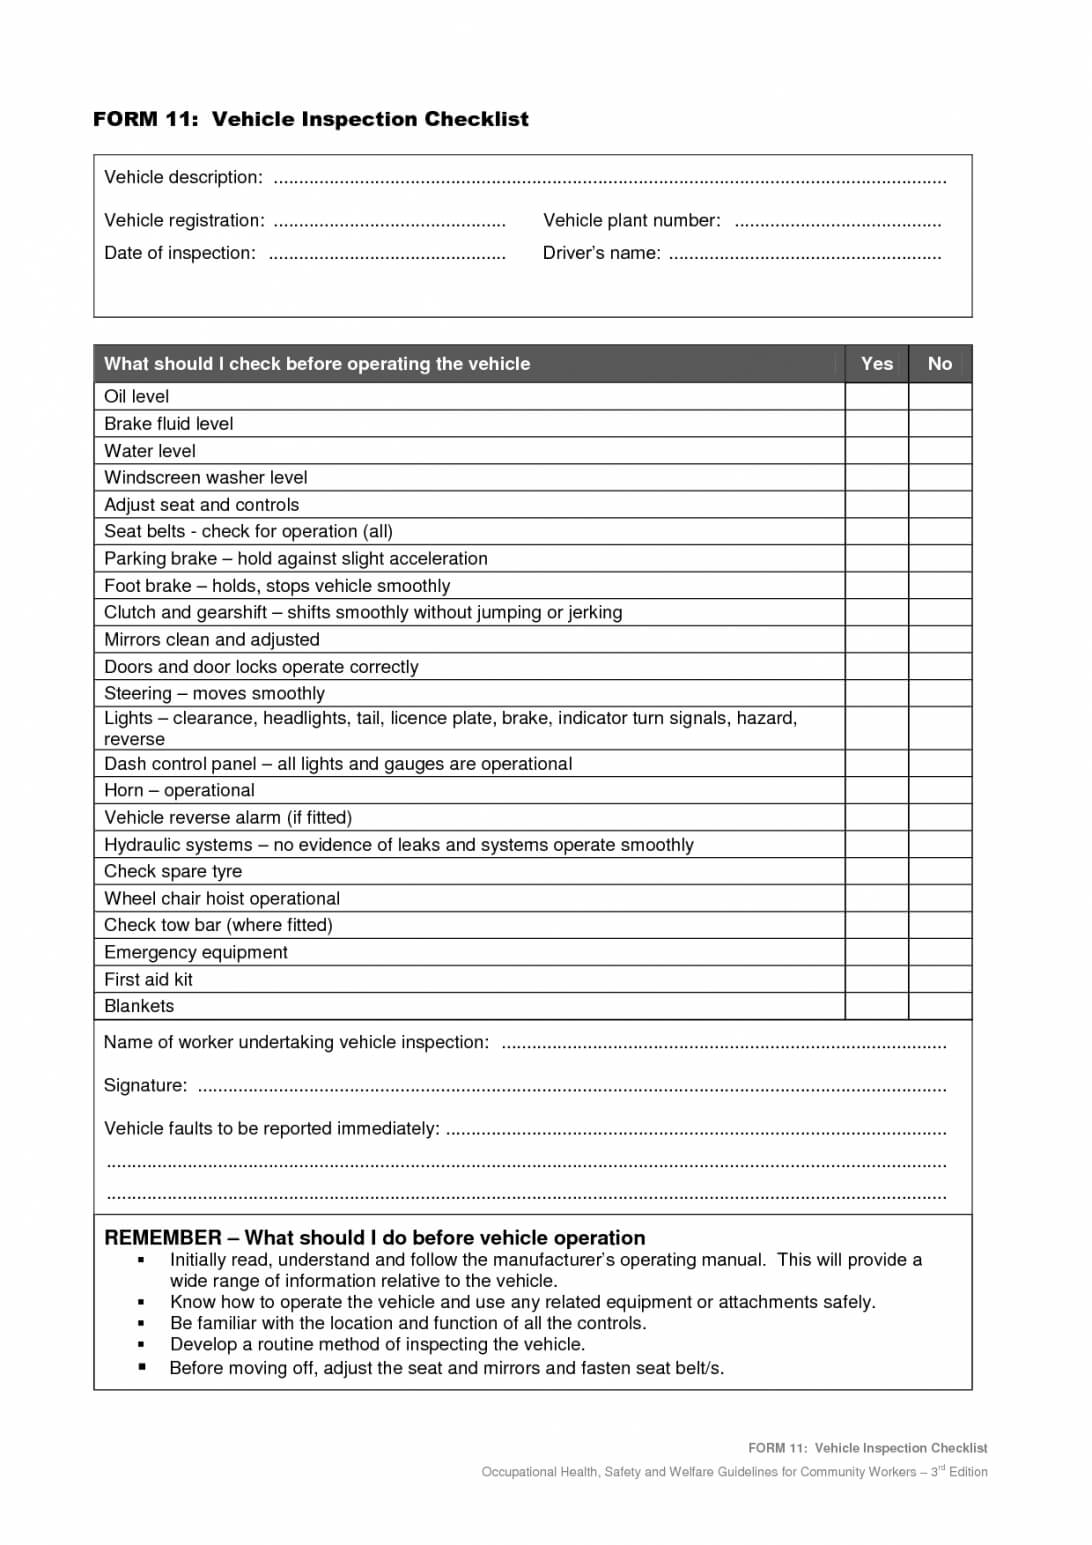 Vehicle Safety Inspection Checklist Form Maintenance Report Within Vehicle Checklist Template Word